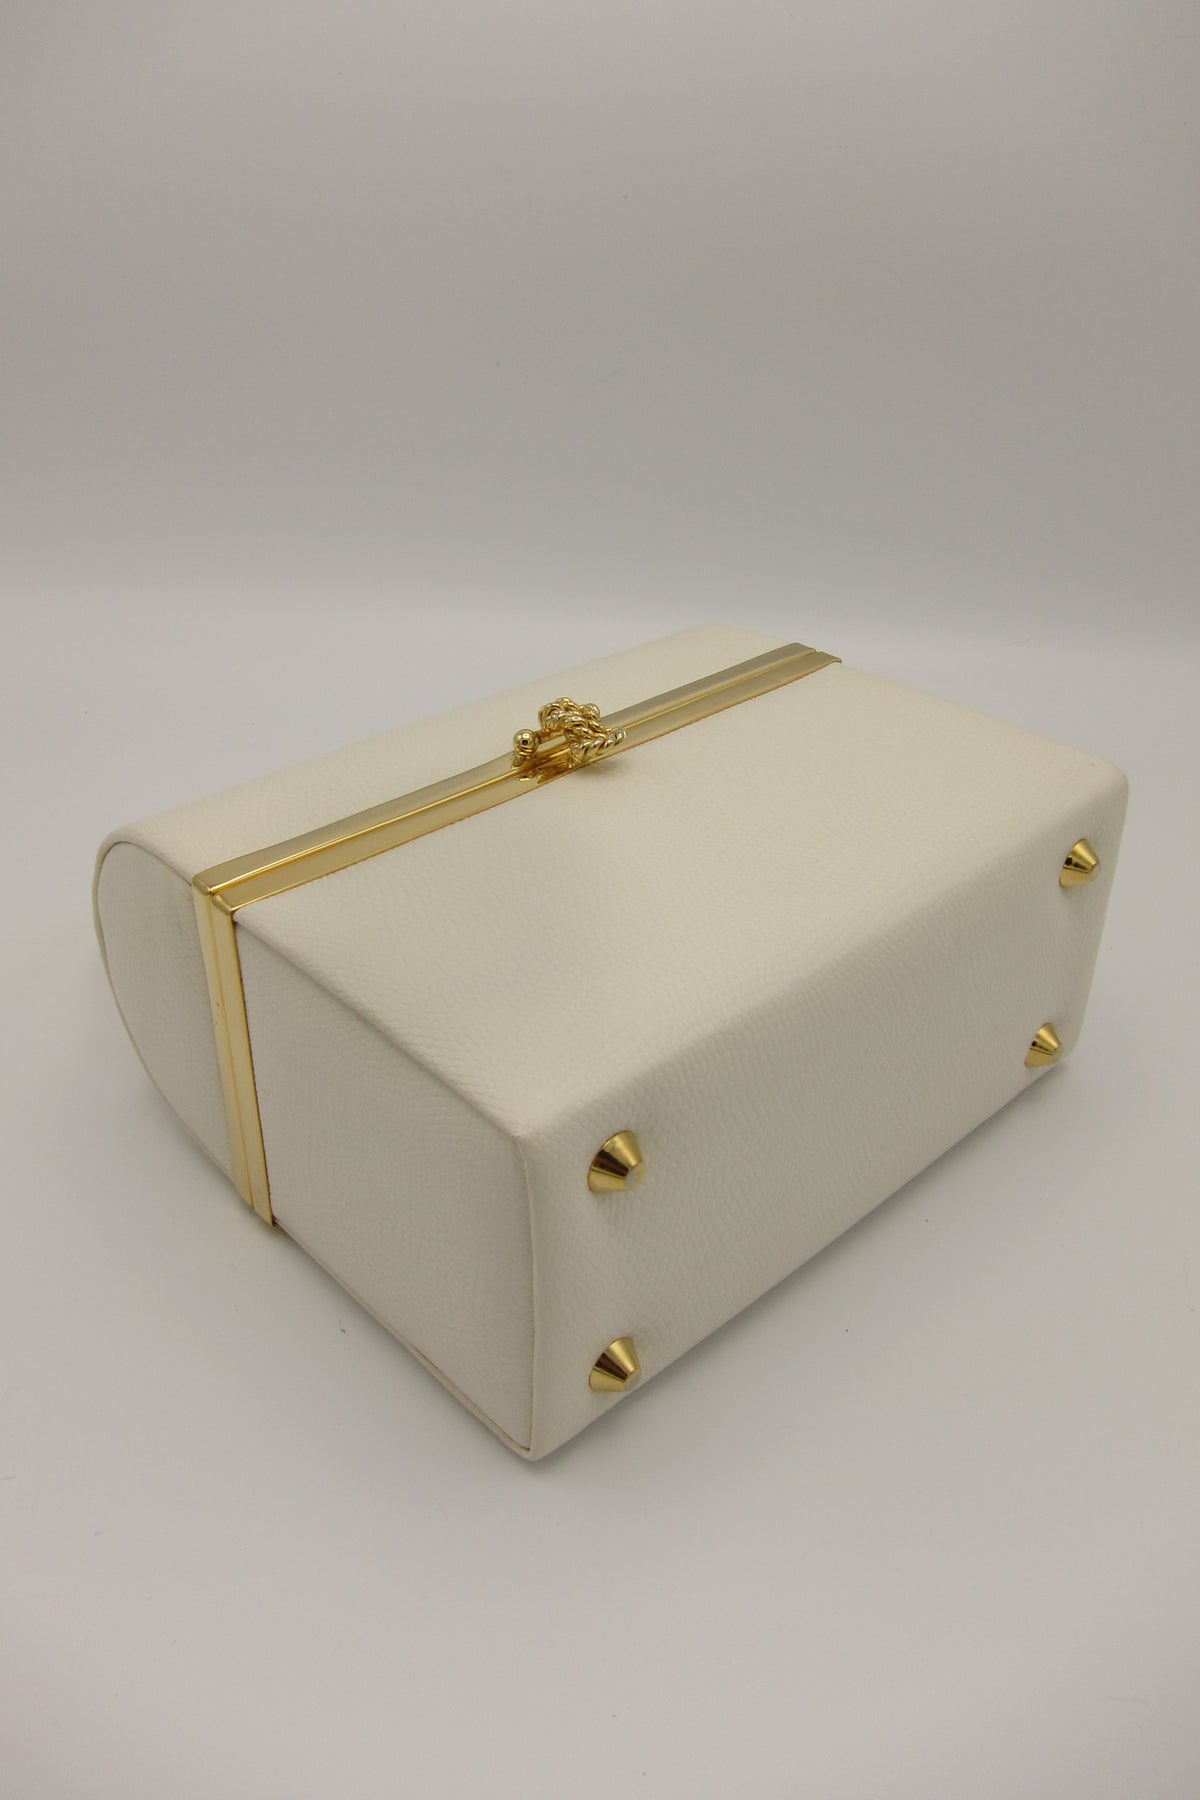 Vintage White and Gold Box Purse